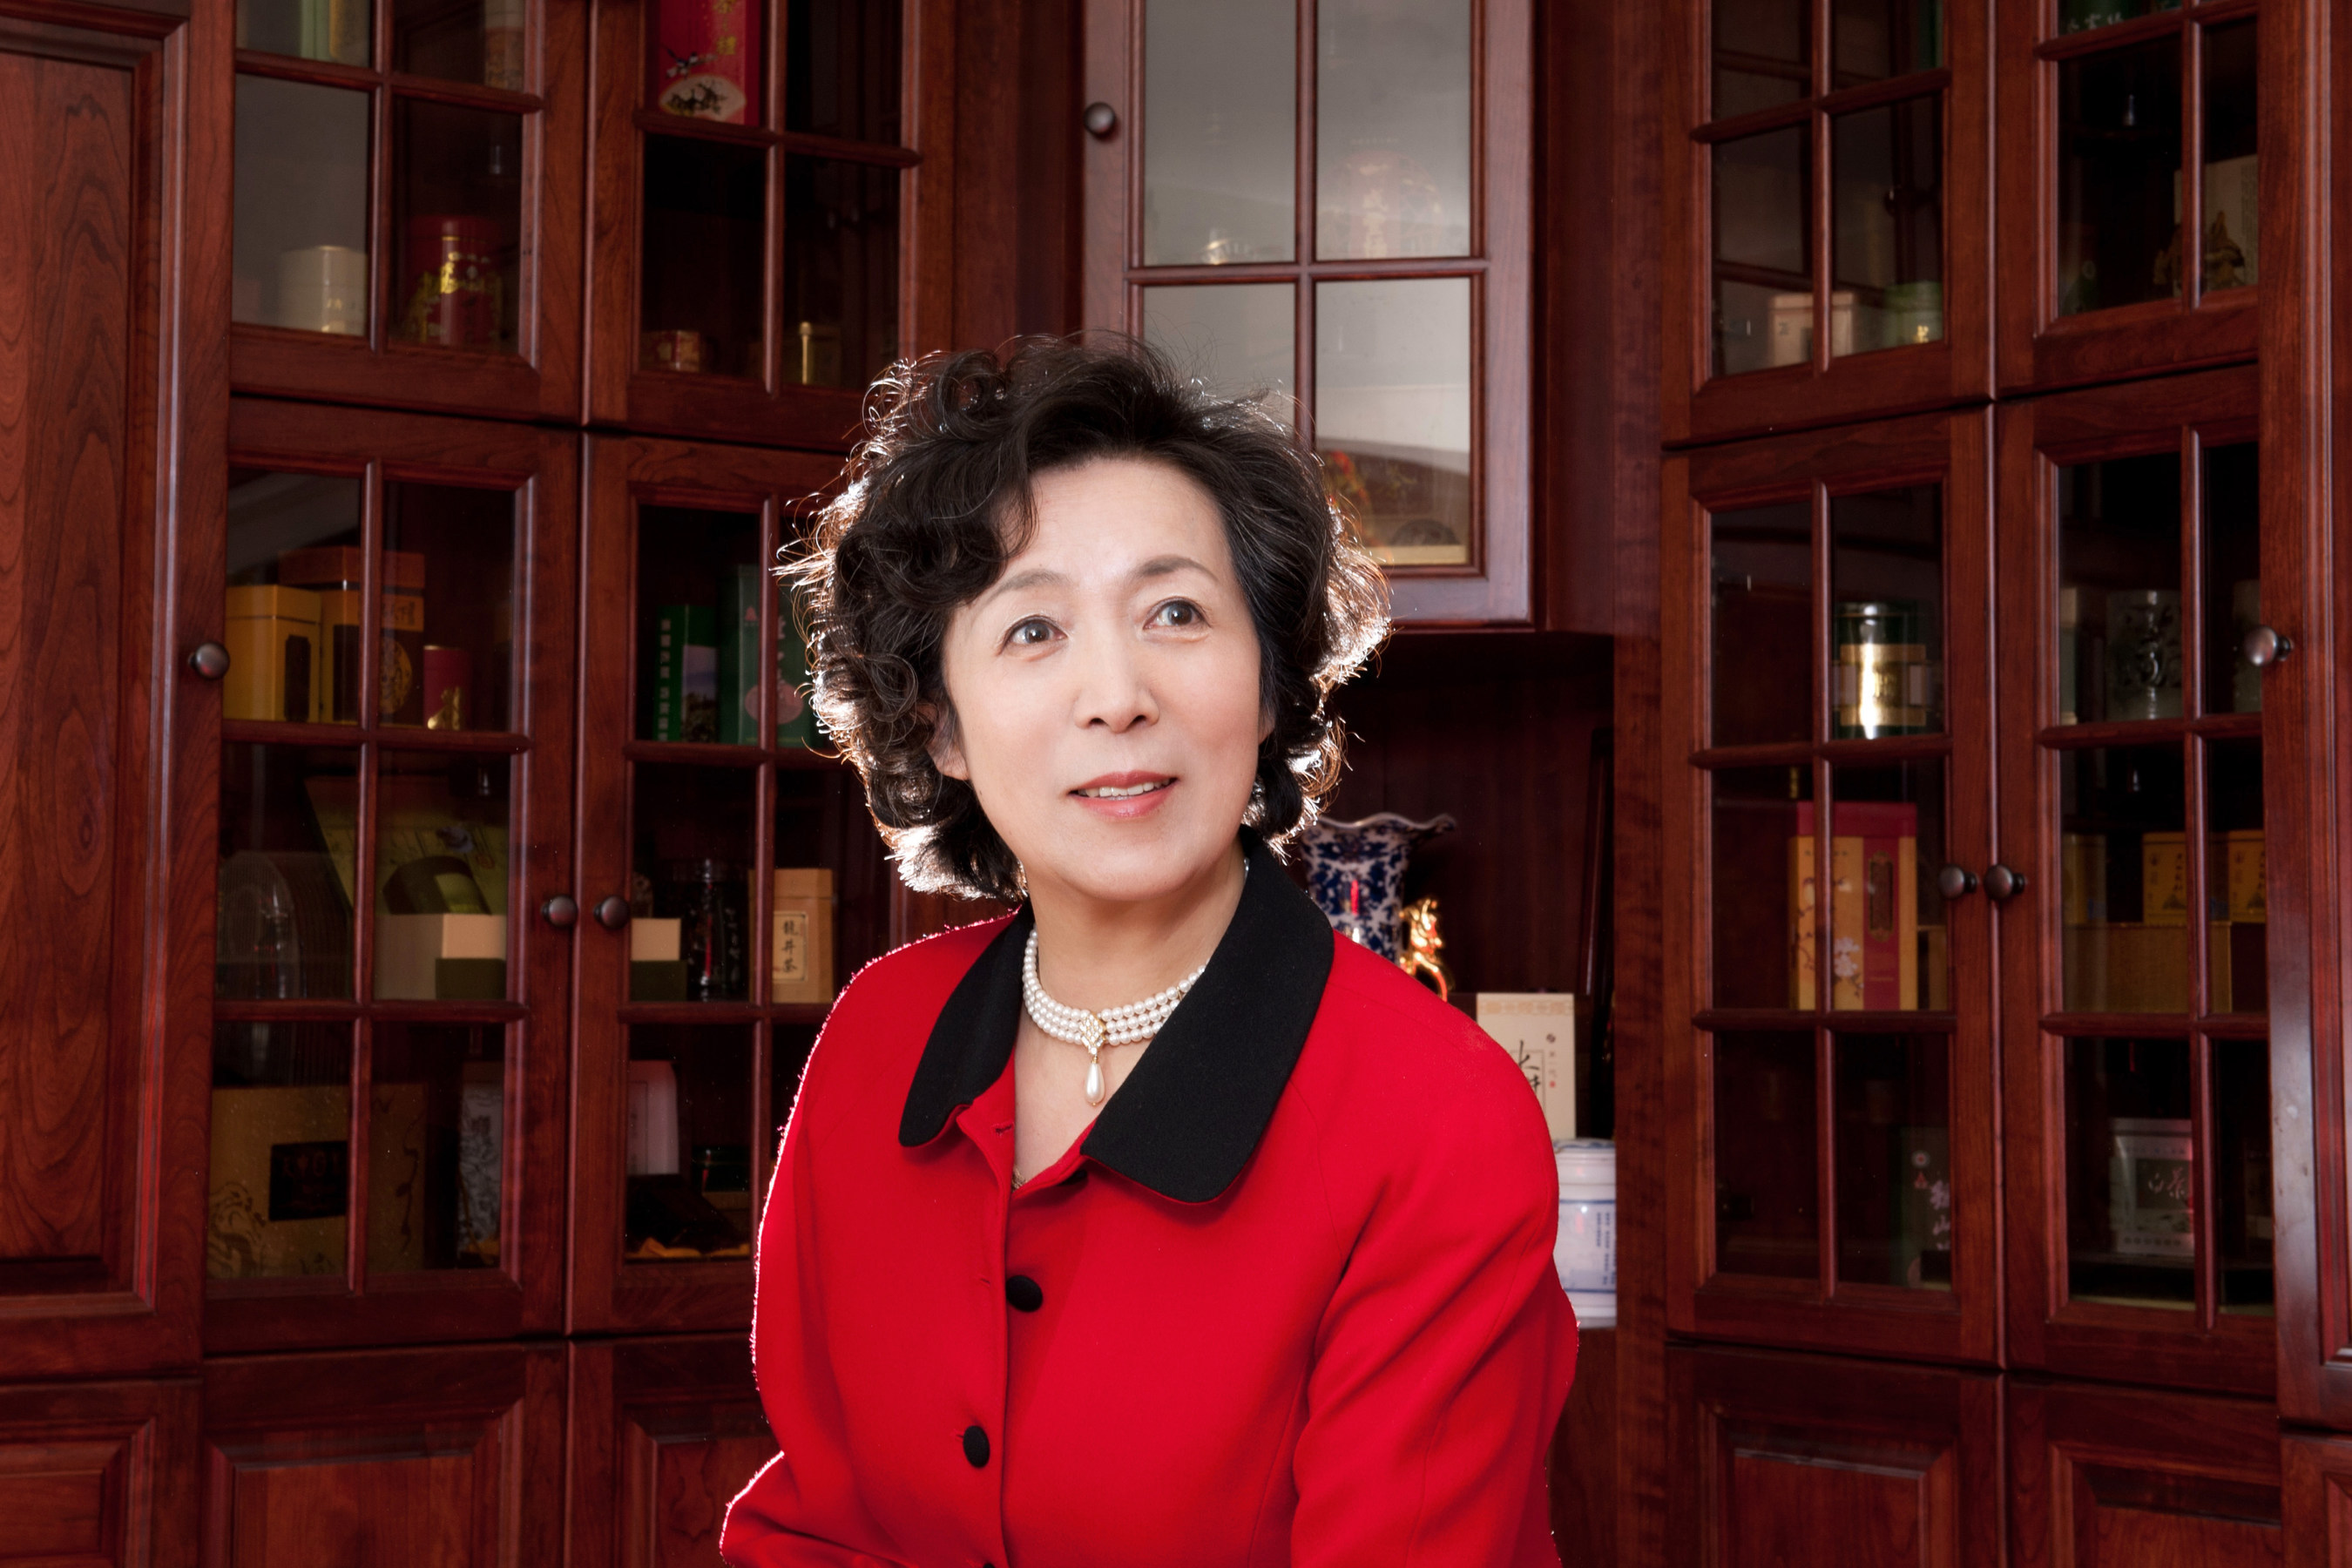 Rutgers appoints international scholar in supply chain management as new dean of Rutgers Business School. Professor Lei Lei's many contributions to Rutgers University include becoming the founding director of the Rutgers Center for Supply Chain Management in 2001 and establishing the Department of Supply Chain Management and Marketing Sciences in 2008 as founding chair. She has helped bring Rutgers Supply Chain Management academic programs to national and international prominence.